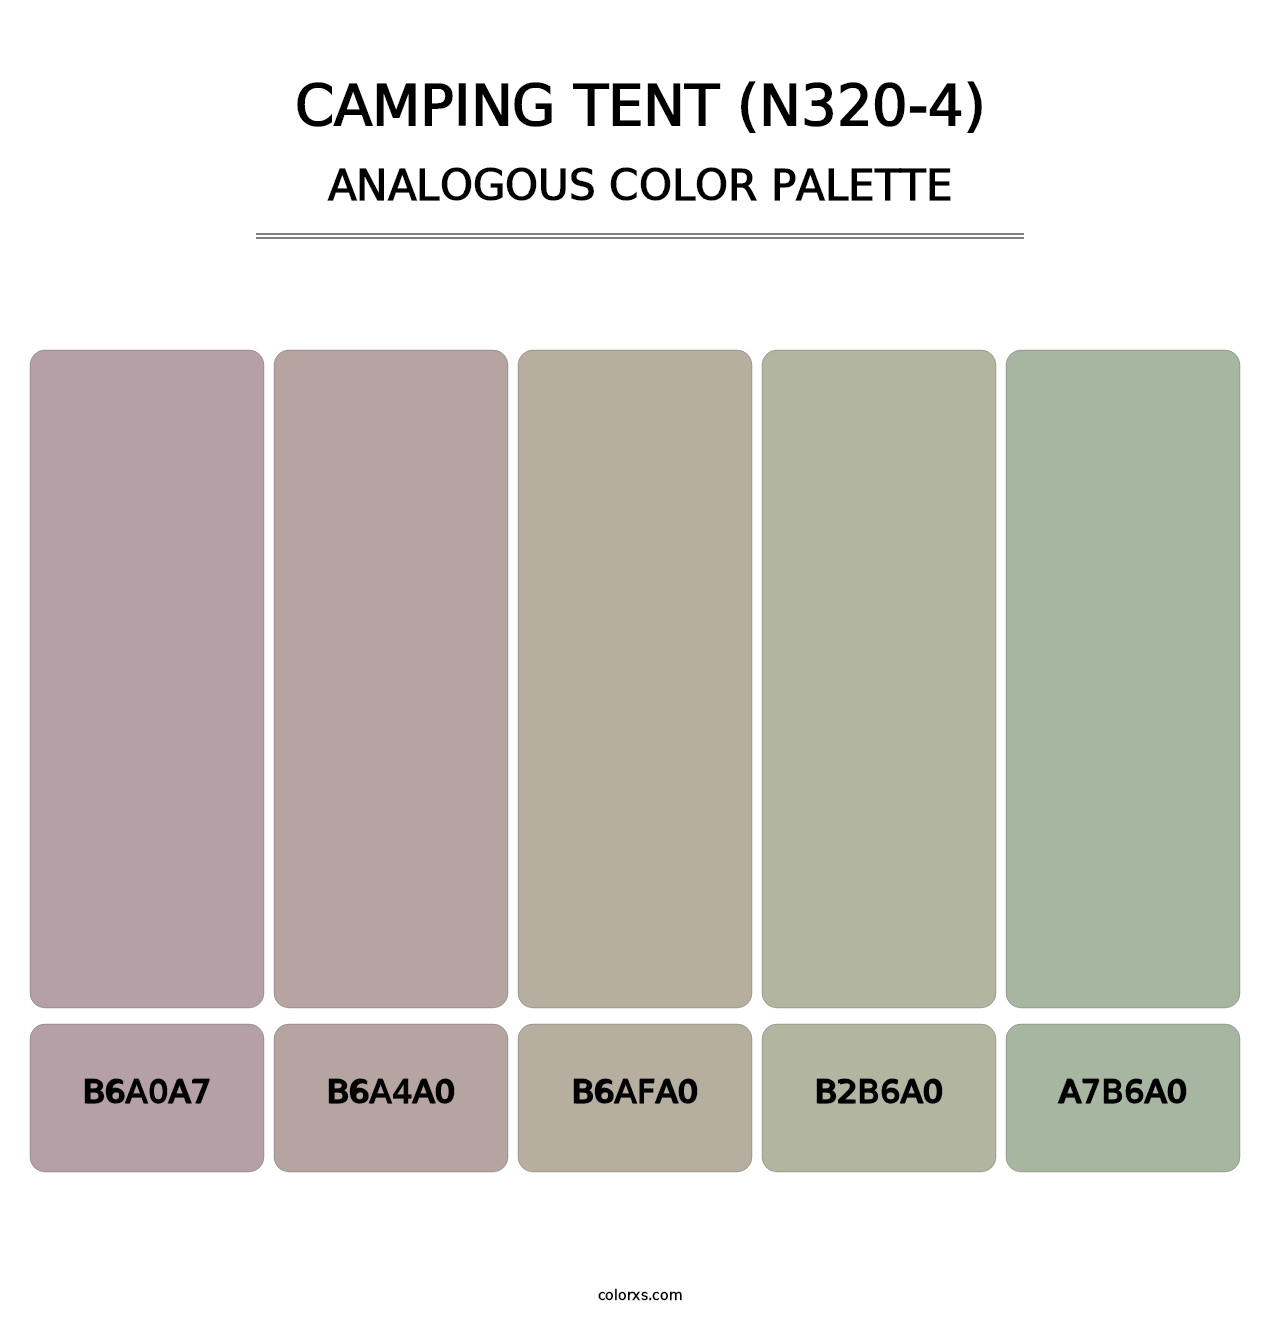 Camping Tent (N320-4) - Analogous Color Palette